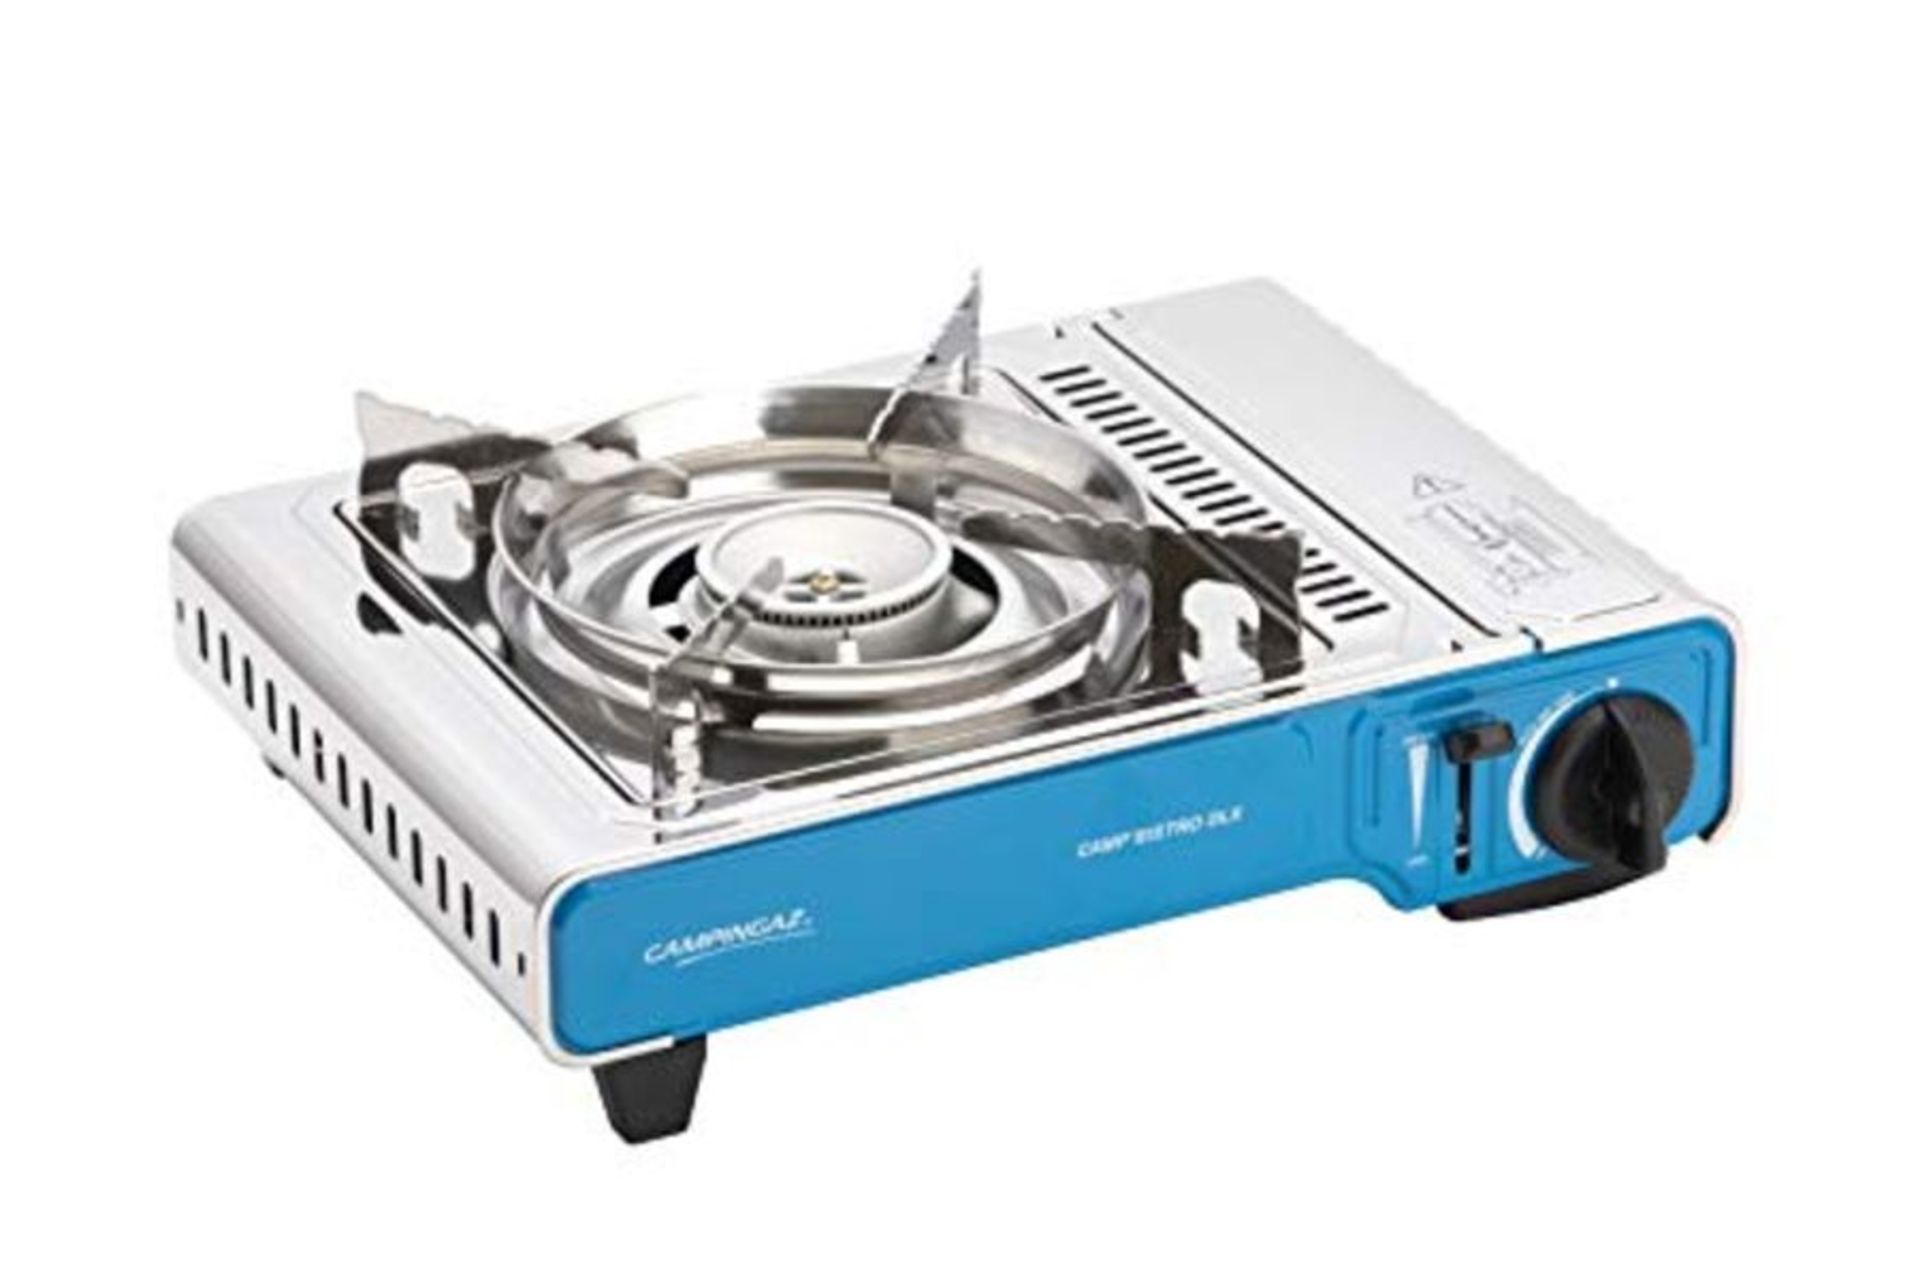 Campingaz Camp Bistro DLX Gas Stove Compact Camping Stove with Piezo Ignition Cartridg